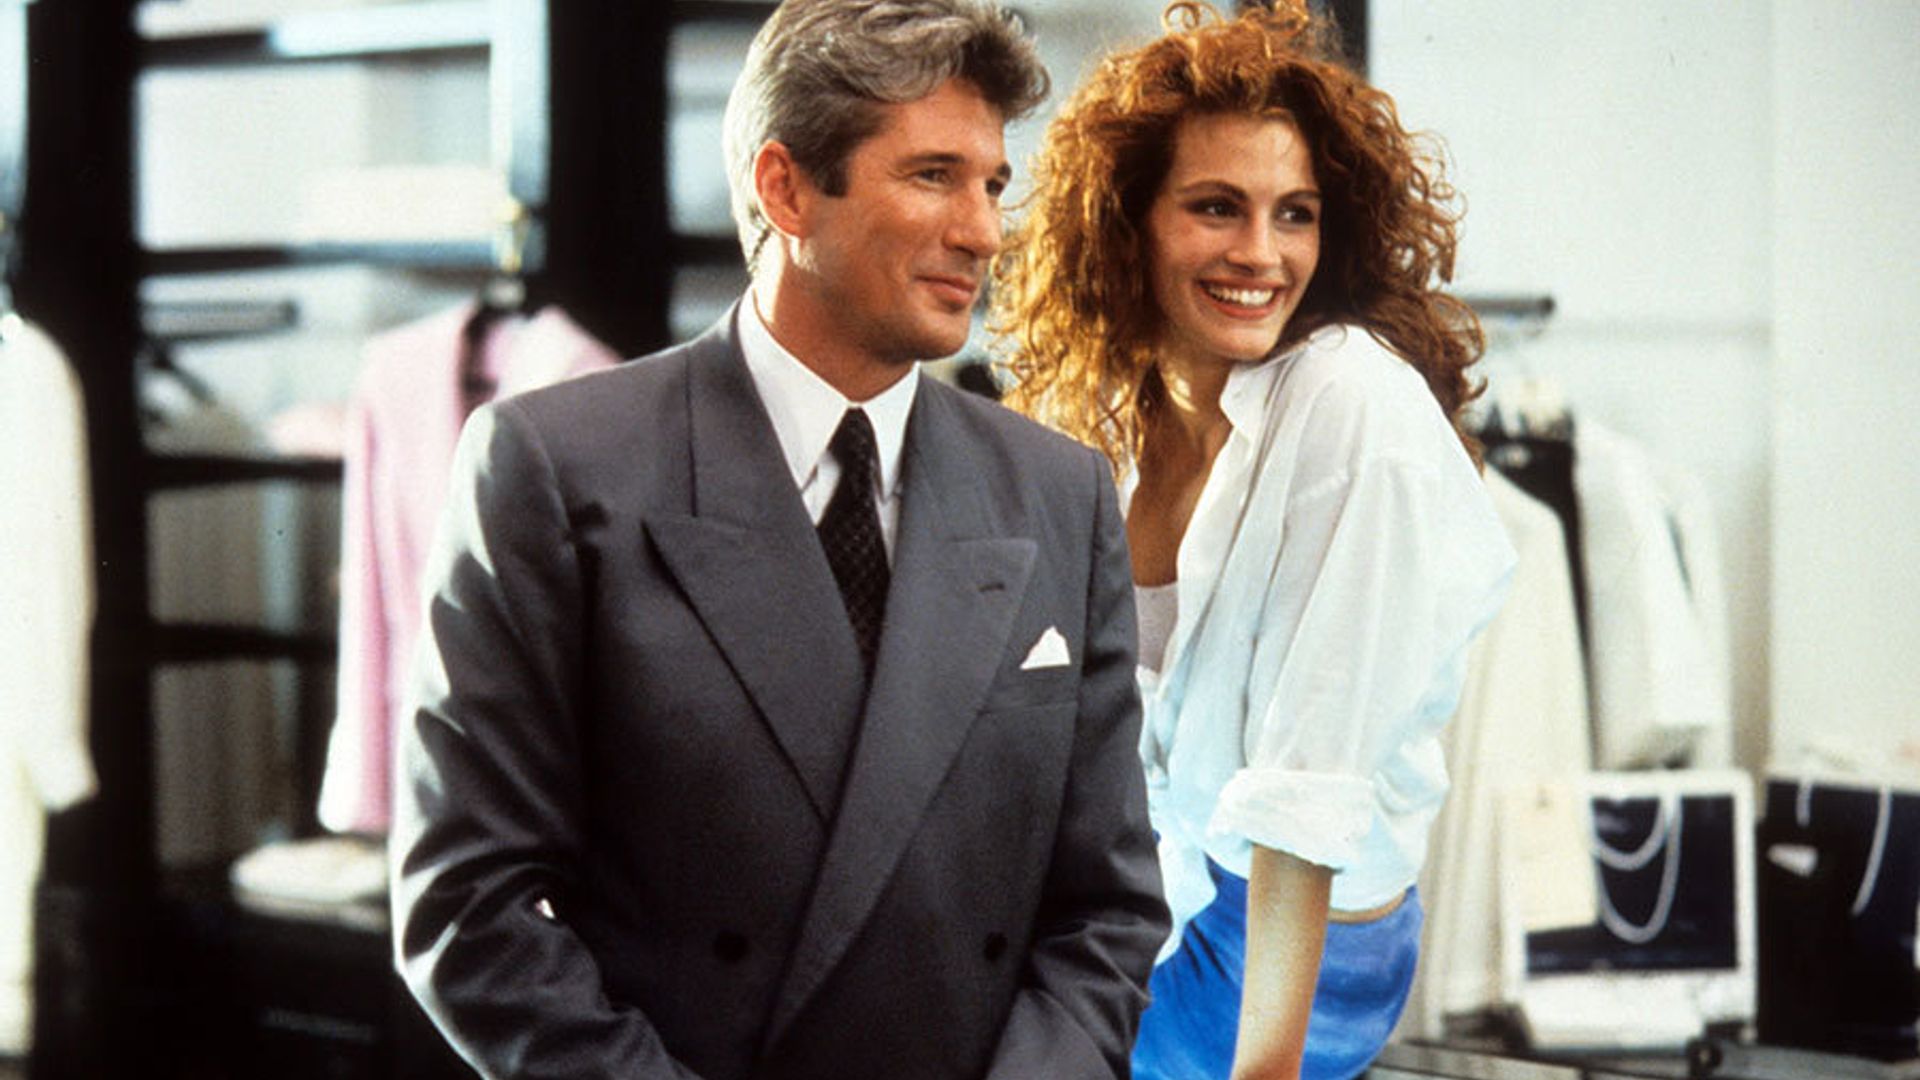 Find out which Hollywood actress turned down the lead role in Pretty Woman